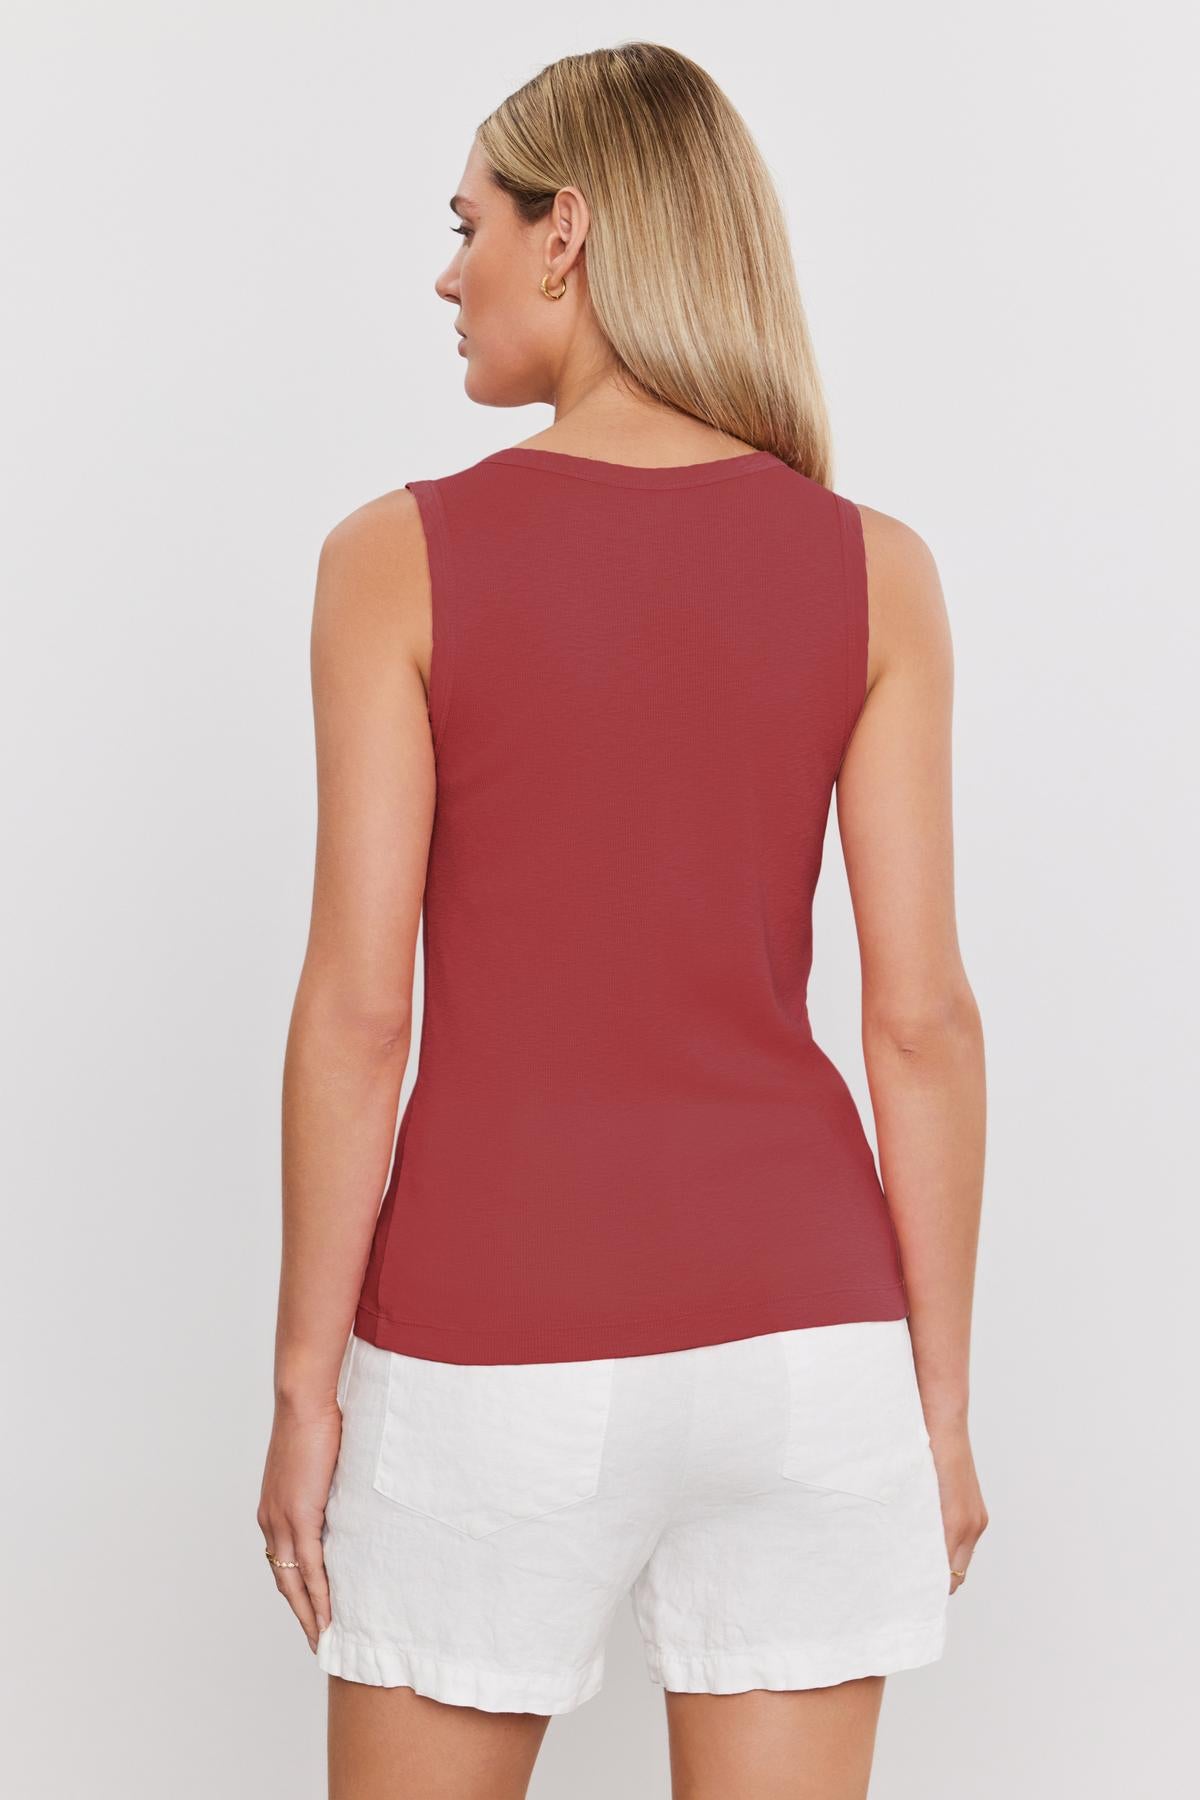   A woman with long blonde hair is seen from the back, wearing a sleeveless red MAXIE RIBBED TANK TOP by Velvet by Graham & Spencer and white shorts. 